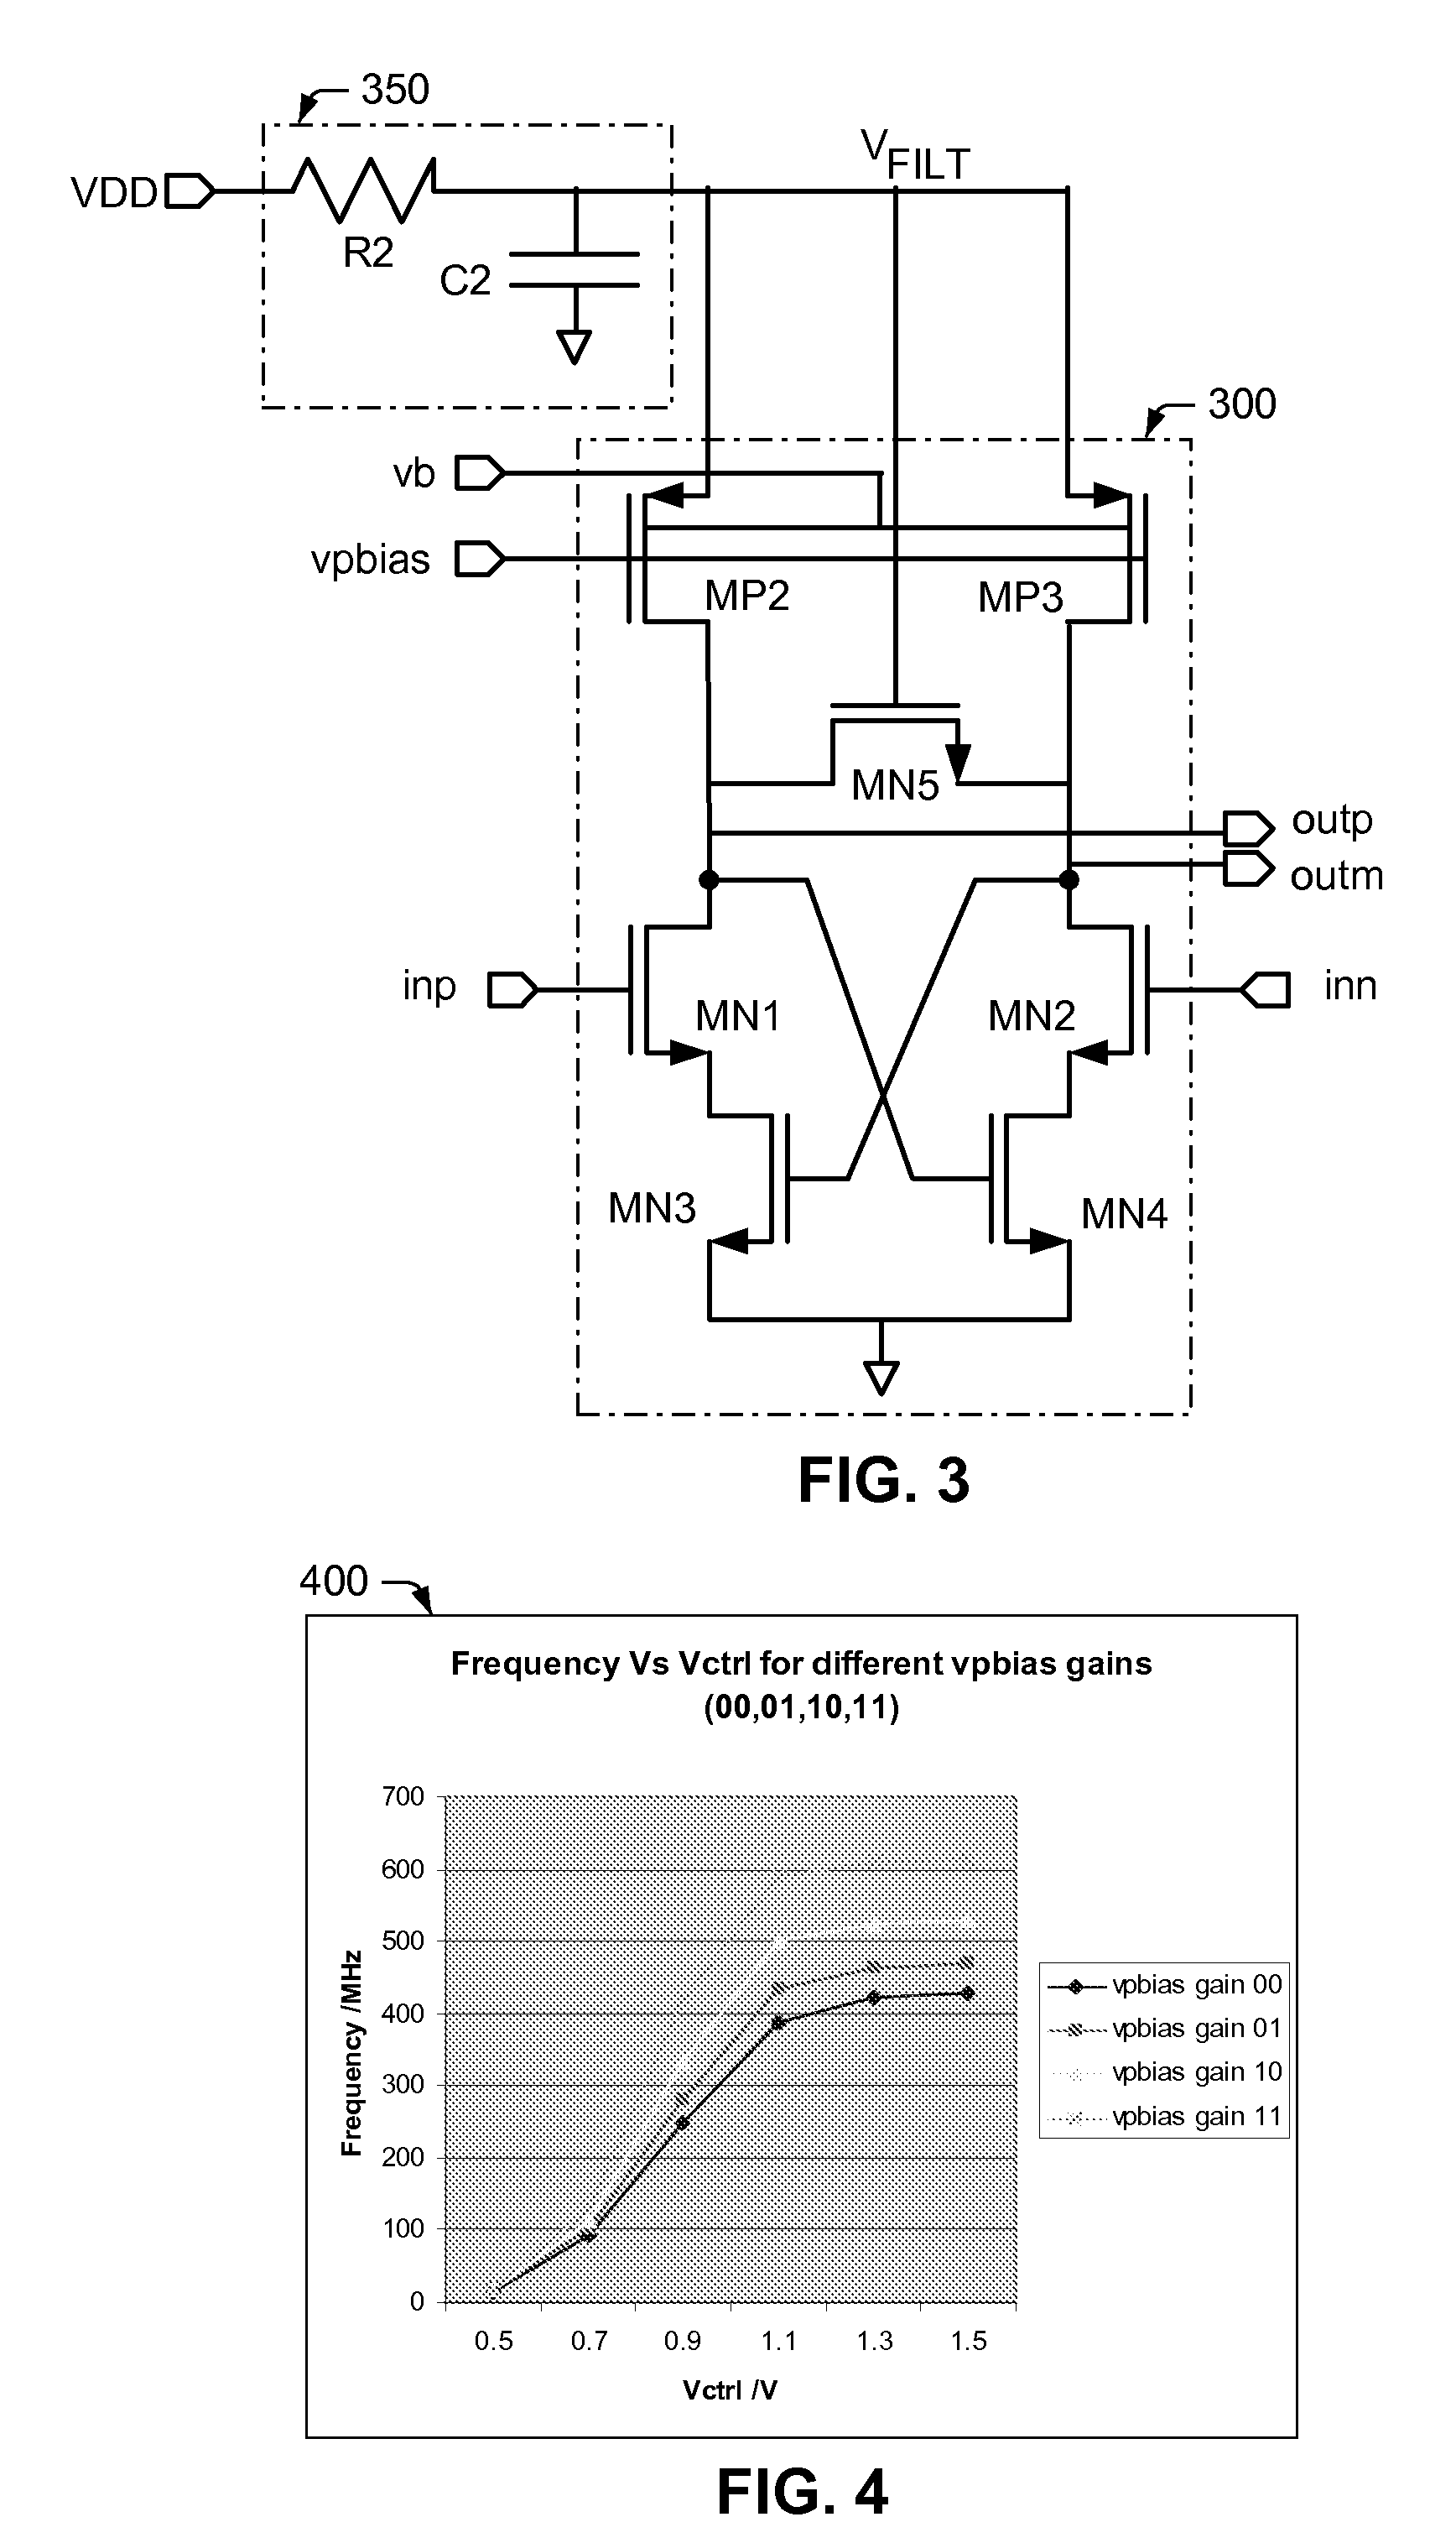 Differential delay cell with low power, low jitter, and small area